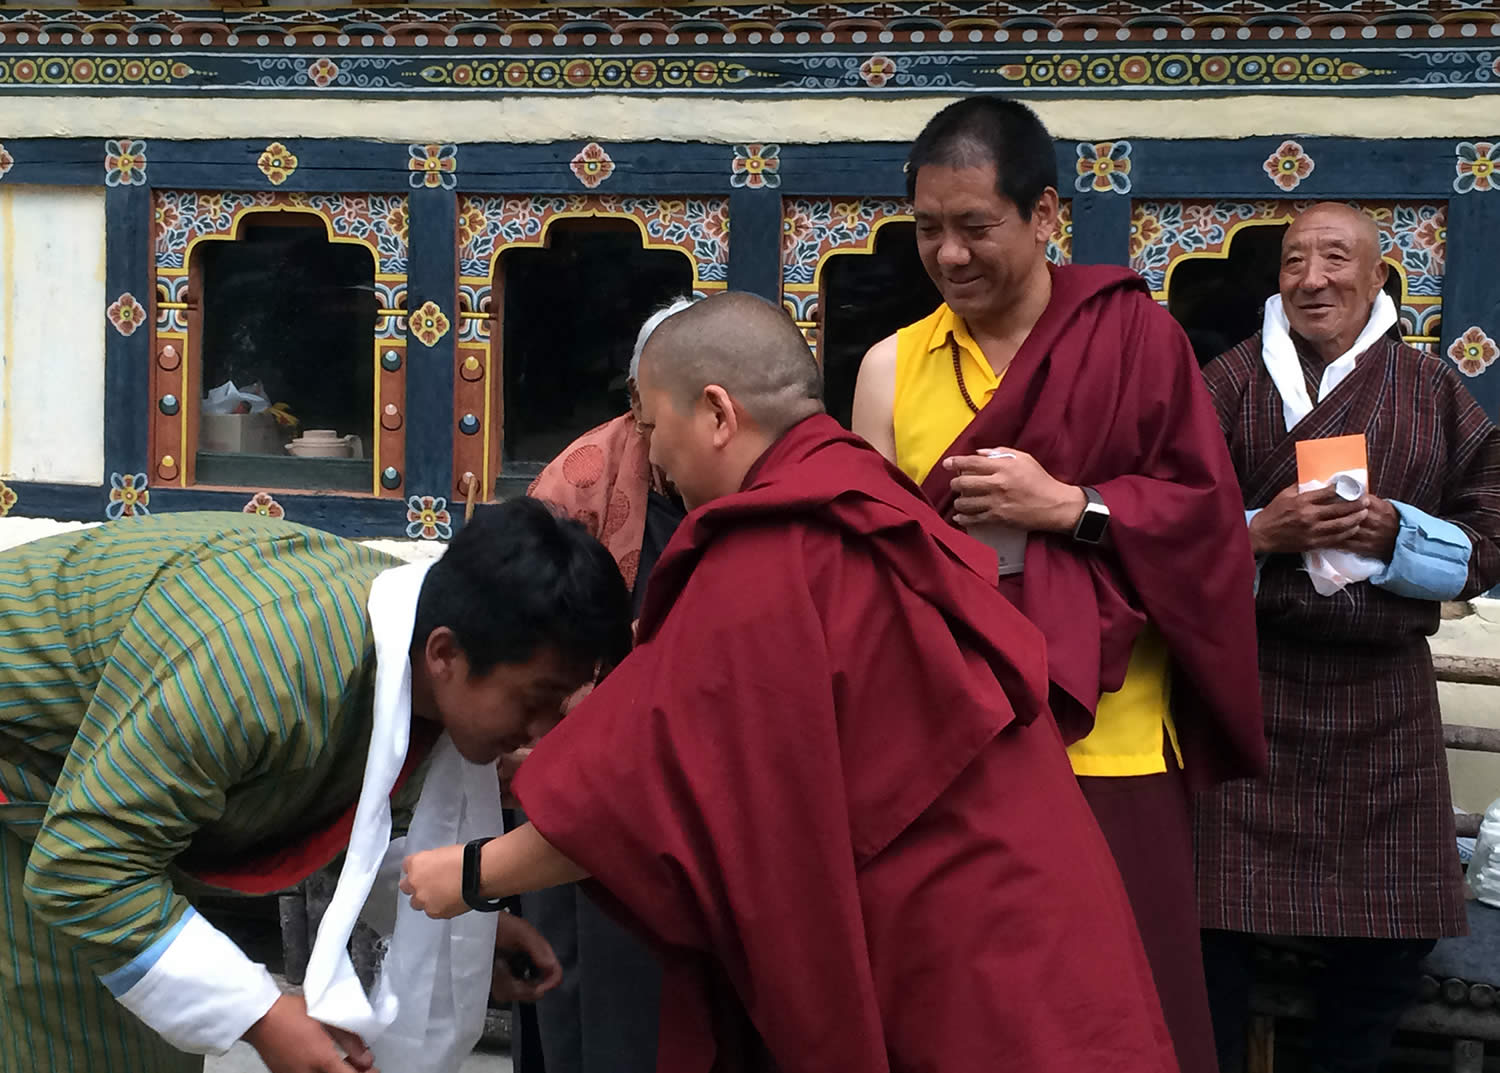 During a tea given by Lama Kunga la's family, khatags are offered to Jetsün Khandro Rinpoche while Kunga la and his father look on.